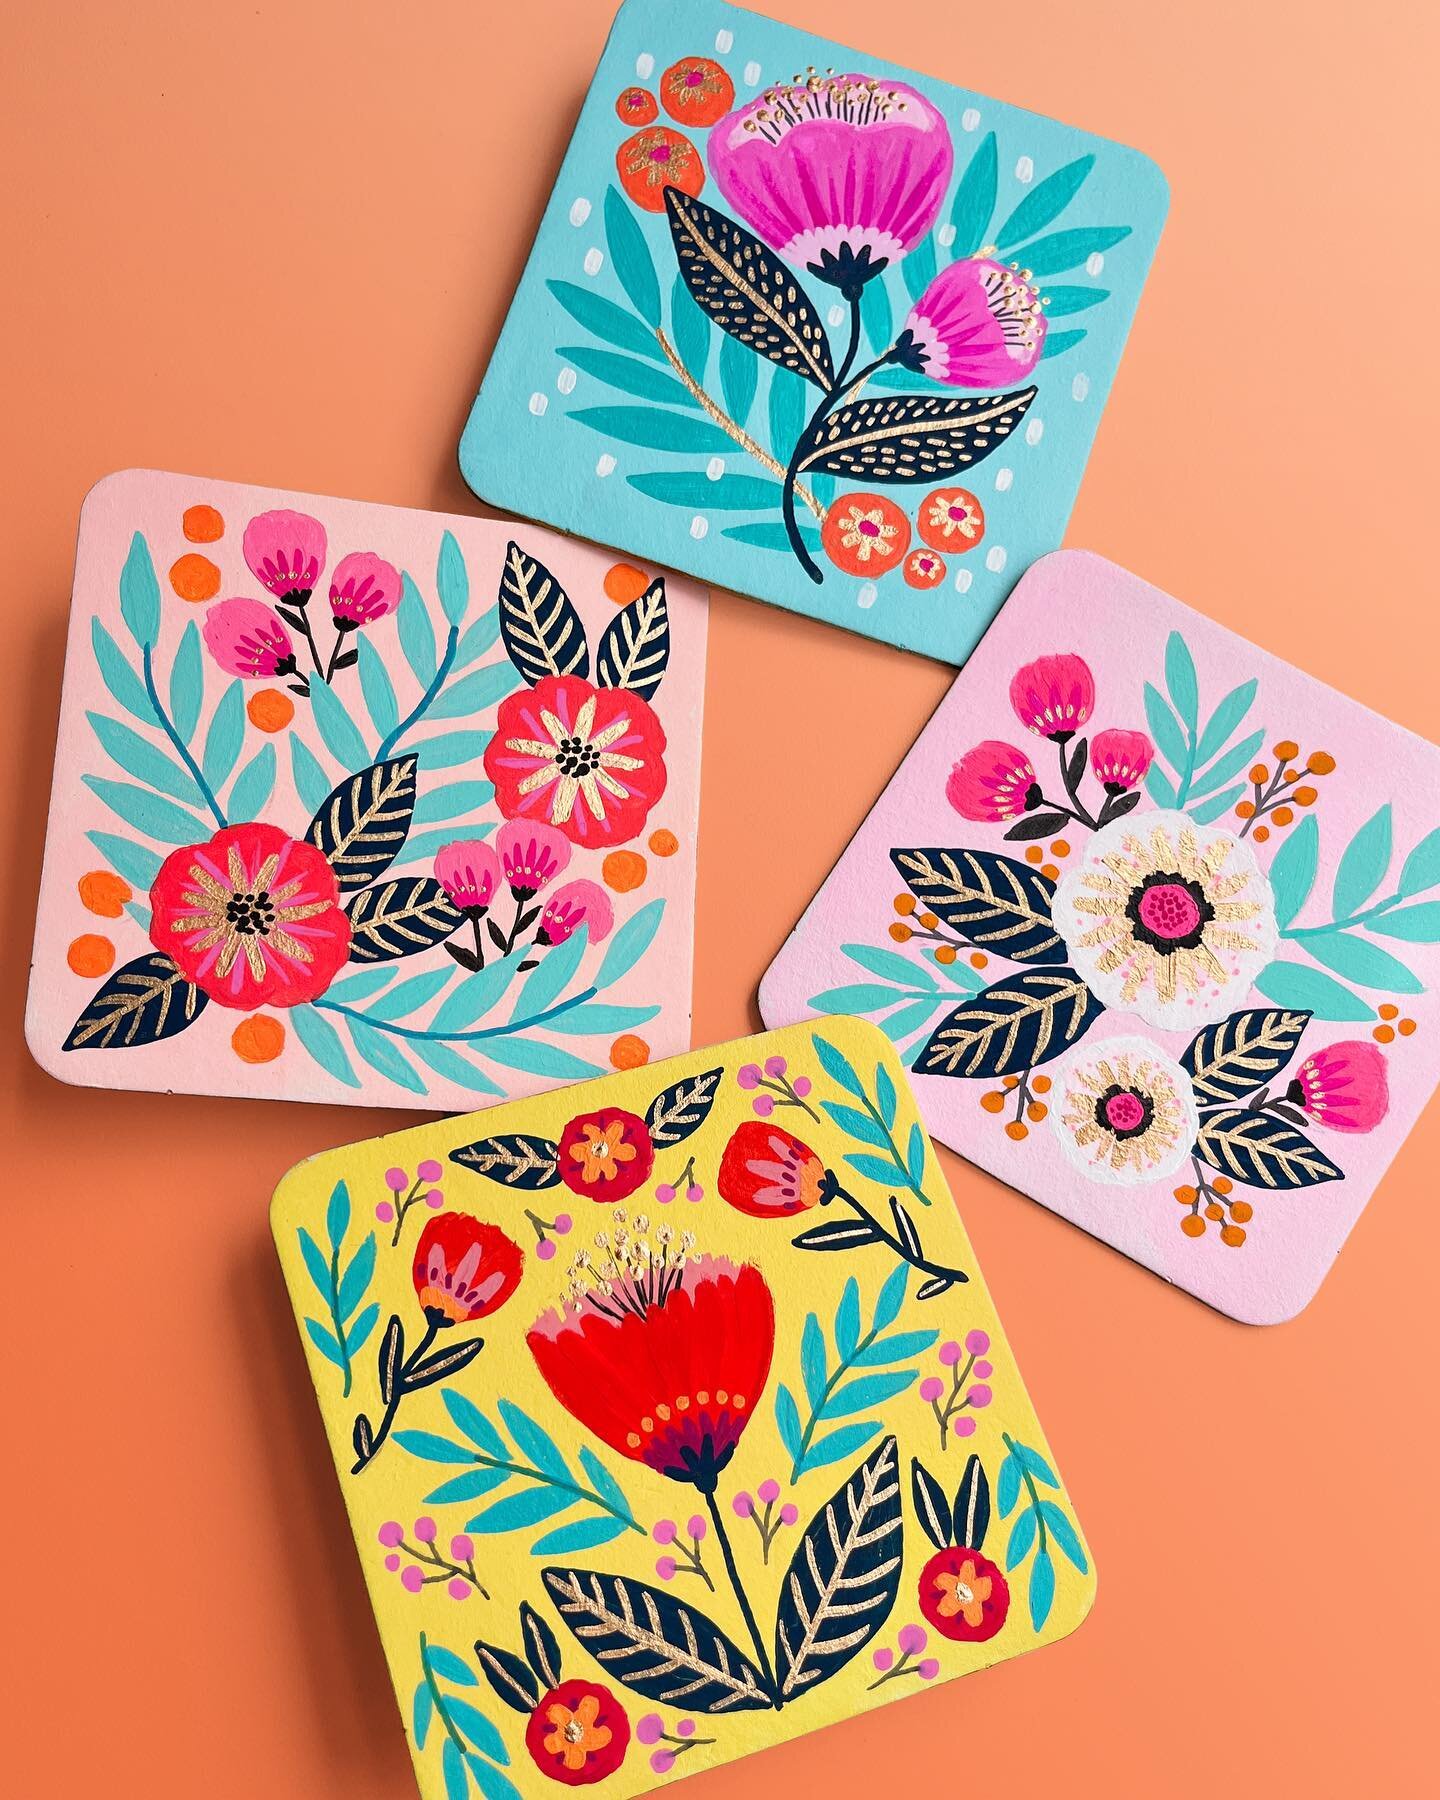 Hand-painted Coasters! 🌸✨ I was invited by @nucleusportland to participate in SALUT! 7 &mdash; their annual coaster art show. It's been a while since I've had to create artwork 100% by hand, and I really enjoyed it, but there were MANY times when I 